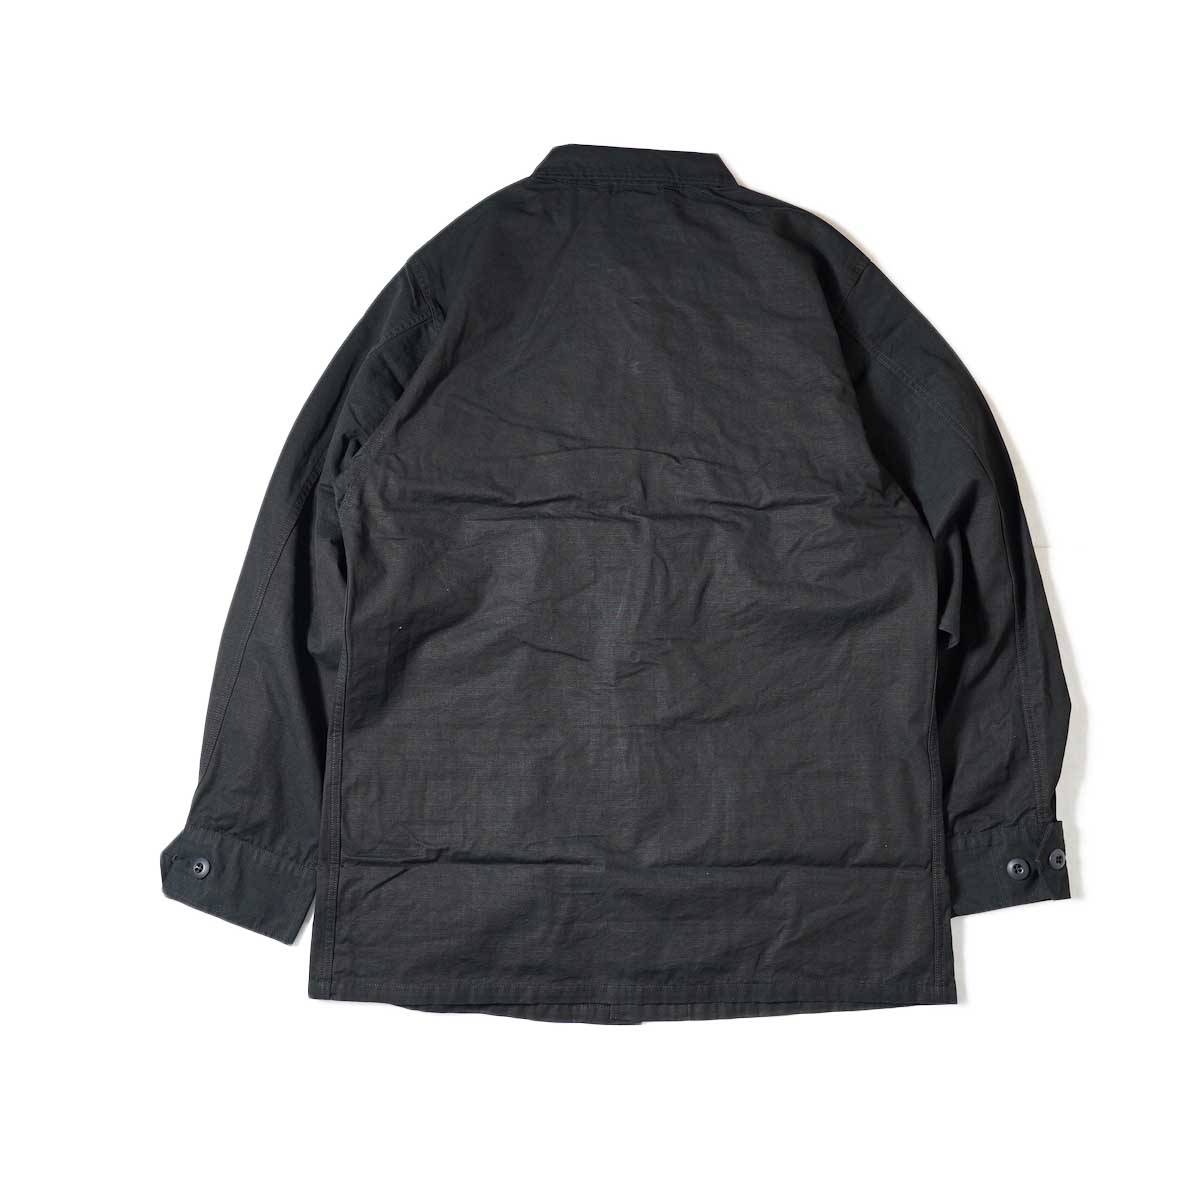 orSlow / US Army Tropical Jacket (Black Rip Stop) 背面